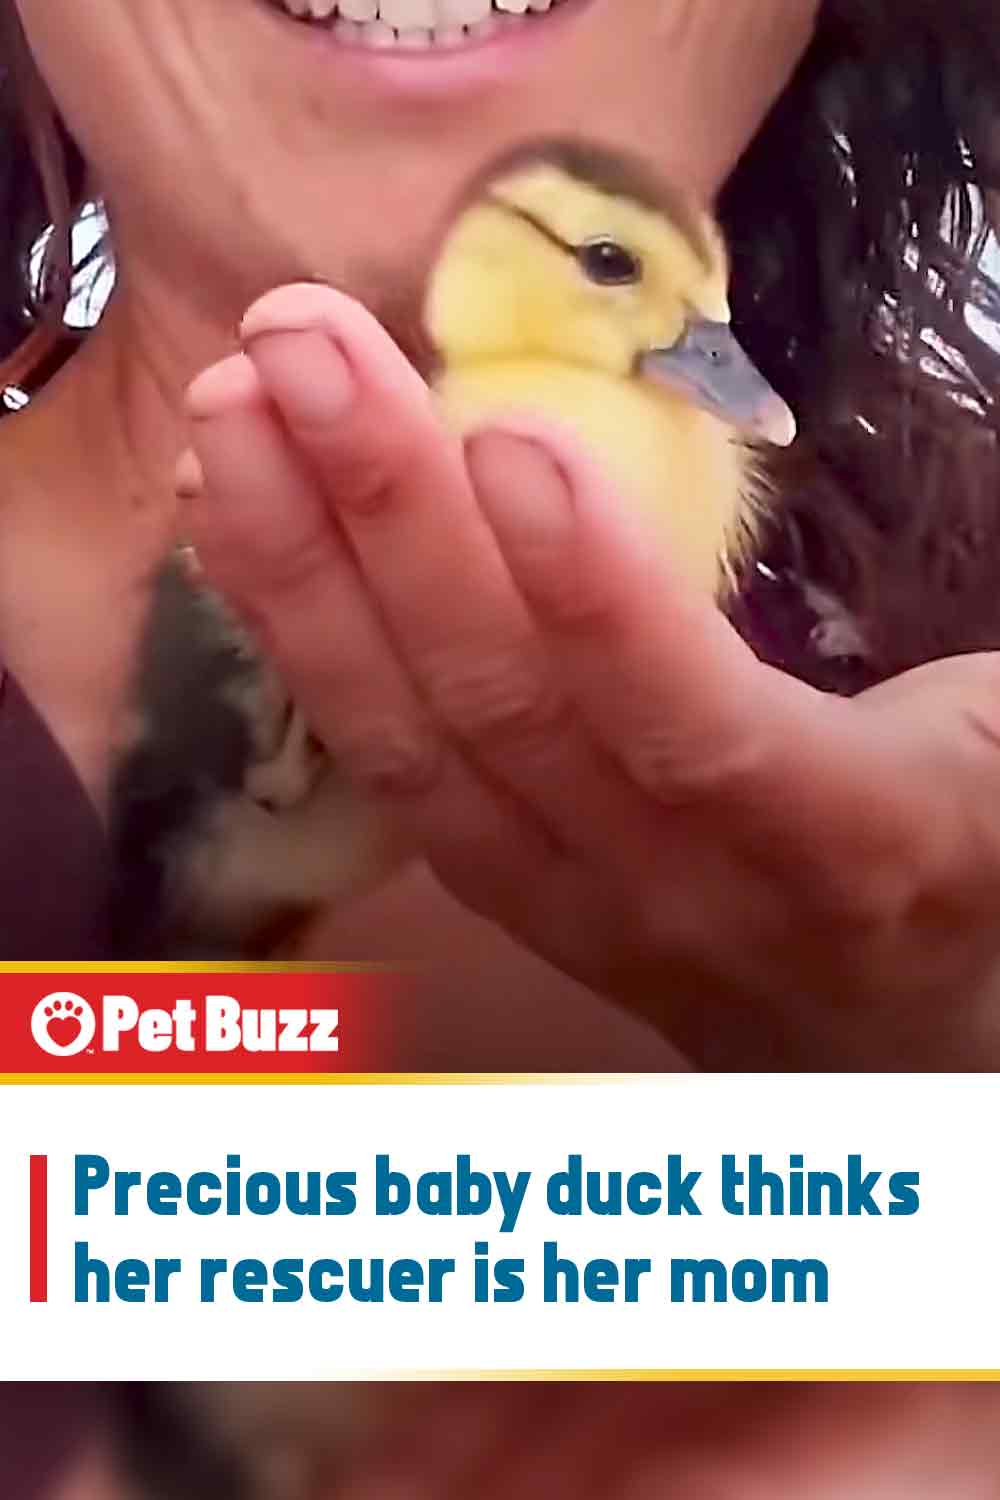 Precious baby duck thinks her rescuer is her mom